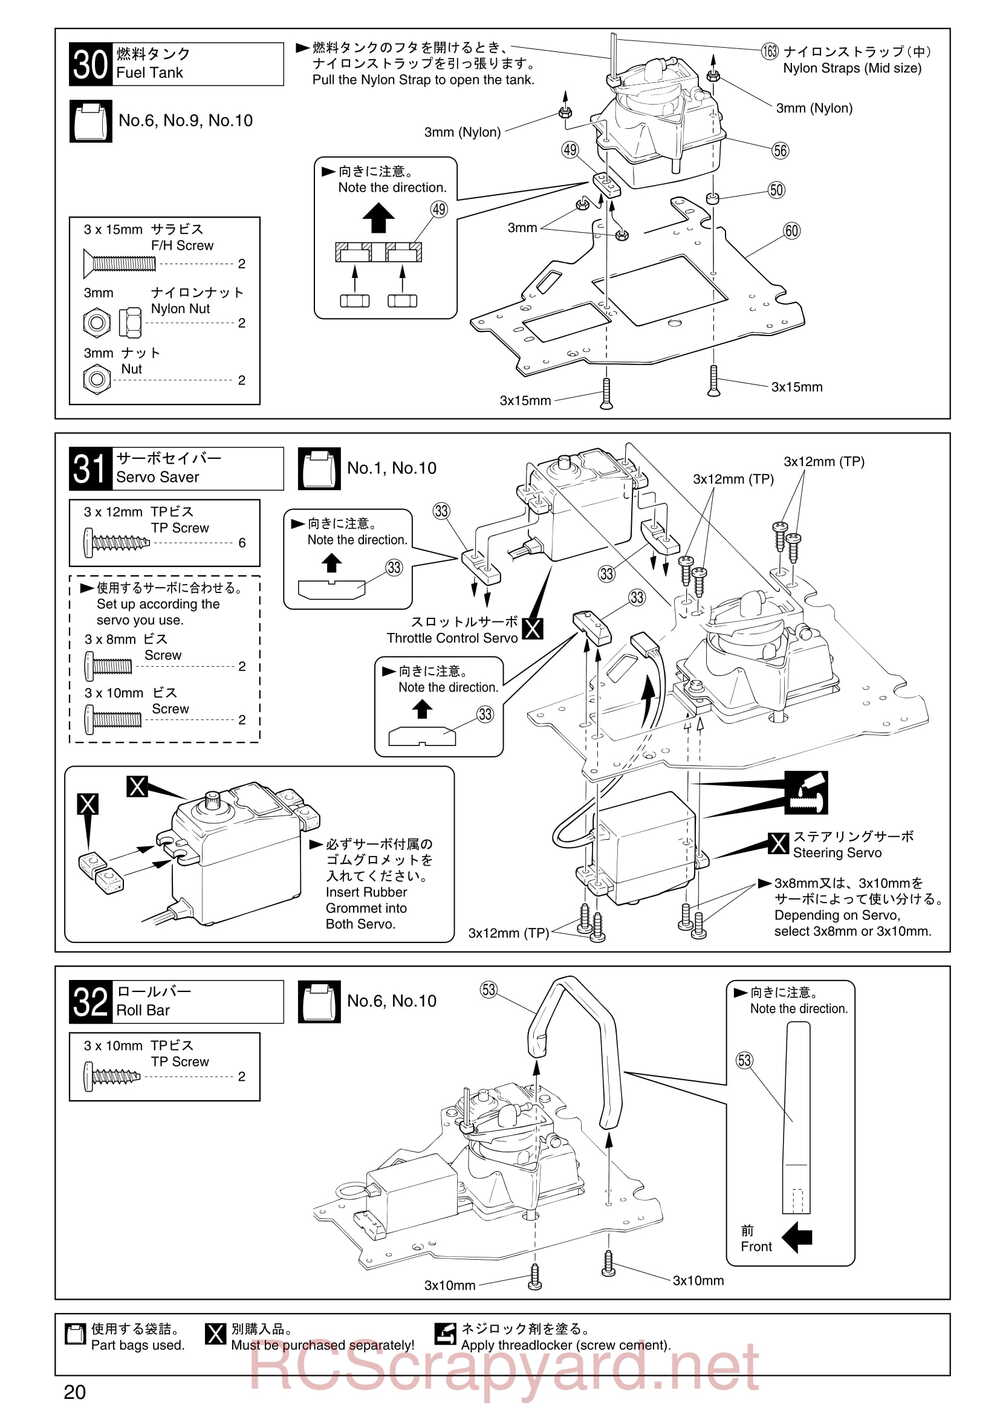 Kyosho - 31102 - V-One RR - Manual - Page 20